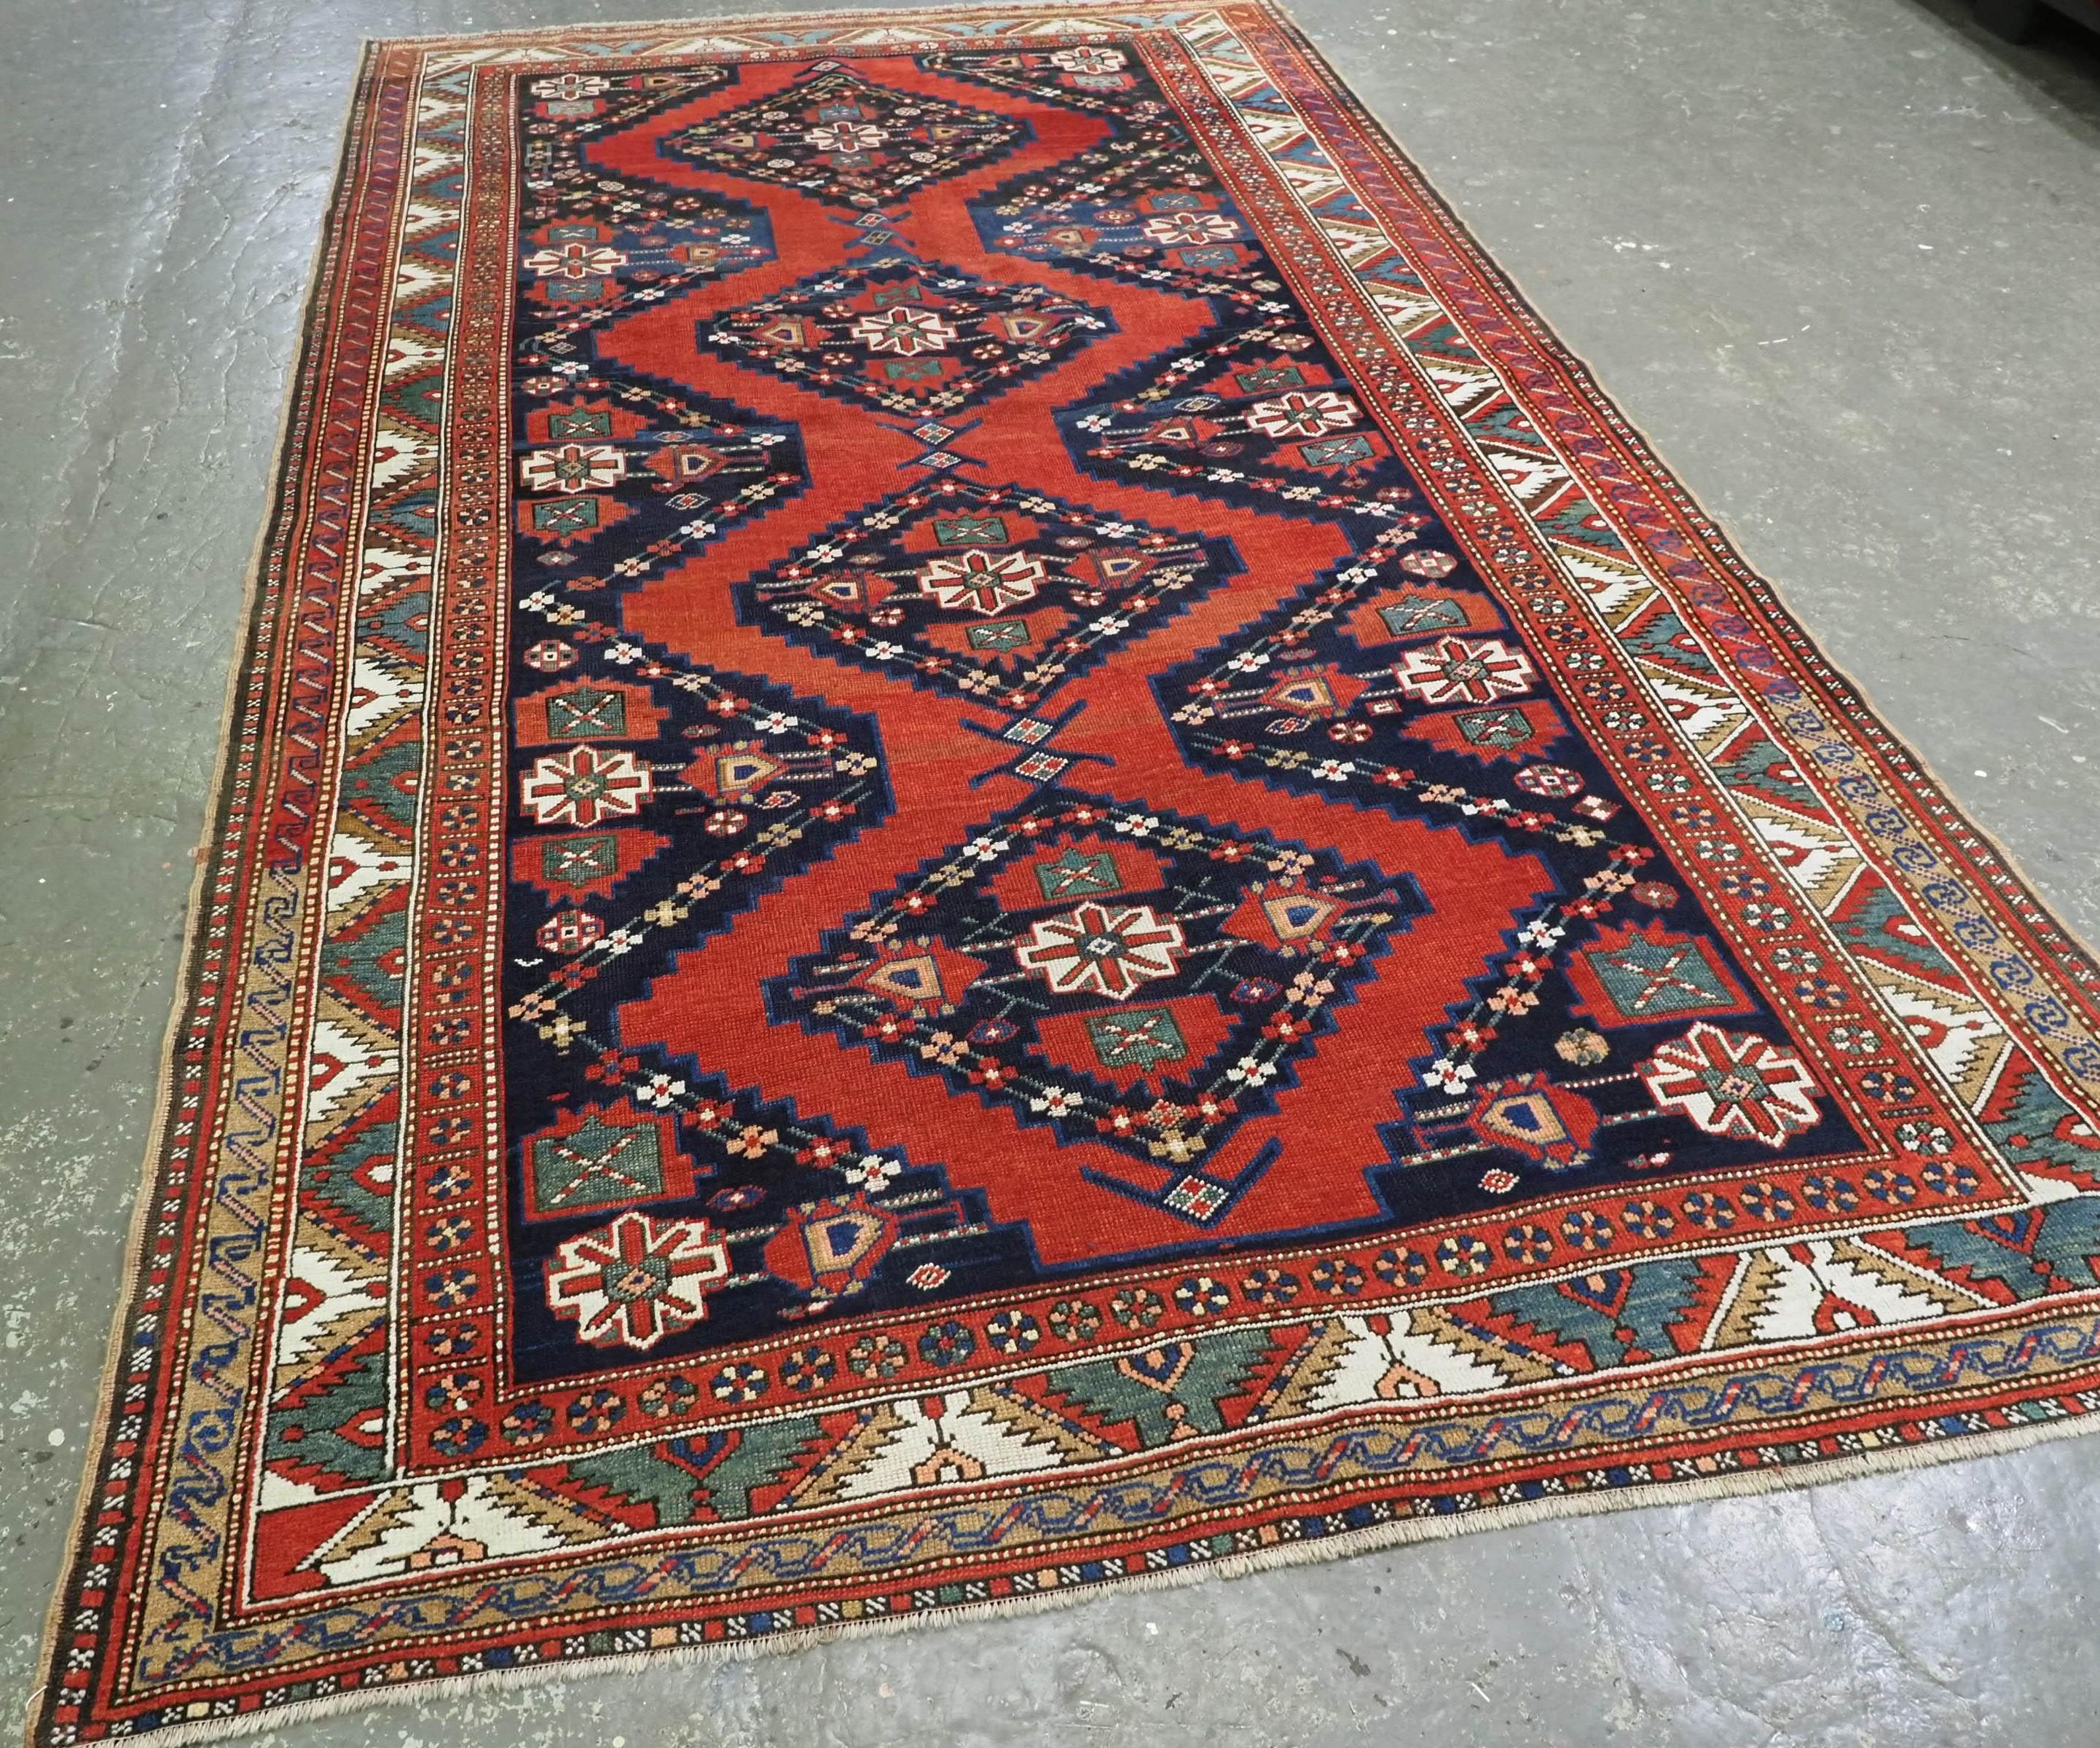 
Size: 10ft 7in x 6ft 0in (323 x 183cm).

Antique South Caucasian Karabagh Kazak kelleh or long rug..

Circa 1900.

The rug has a traditional Karabagh region design of four medallions on a red ground; the medallions and surrounding area are in dark